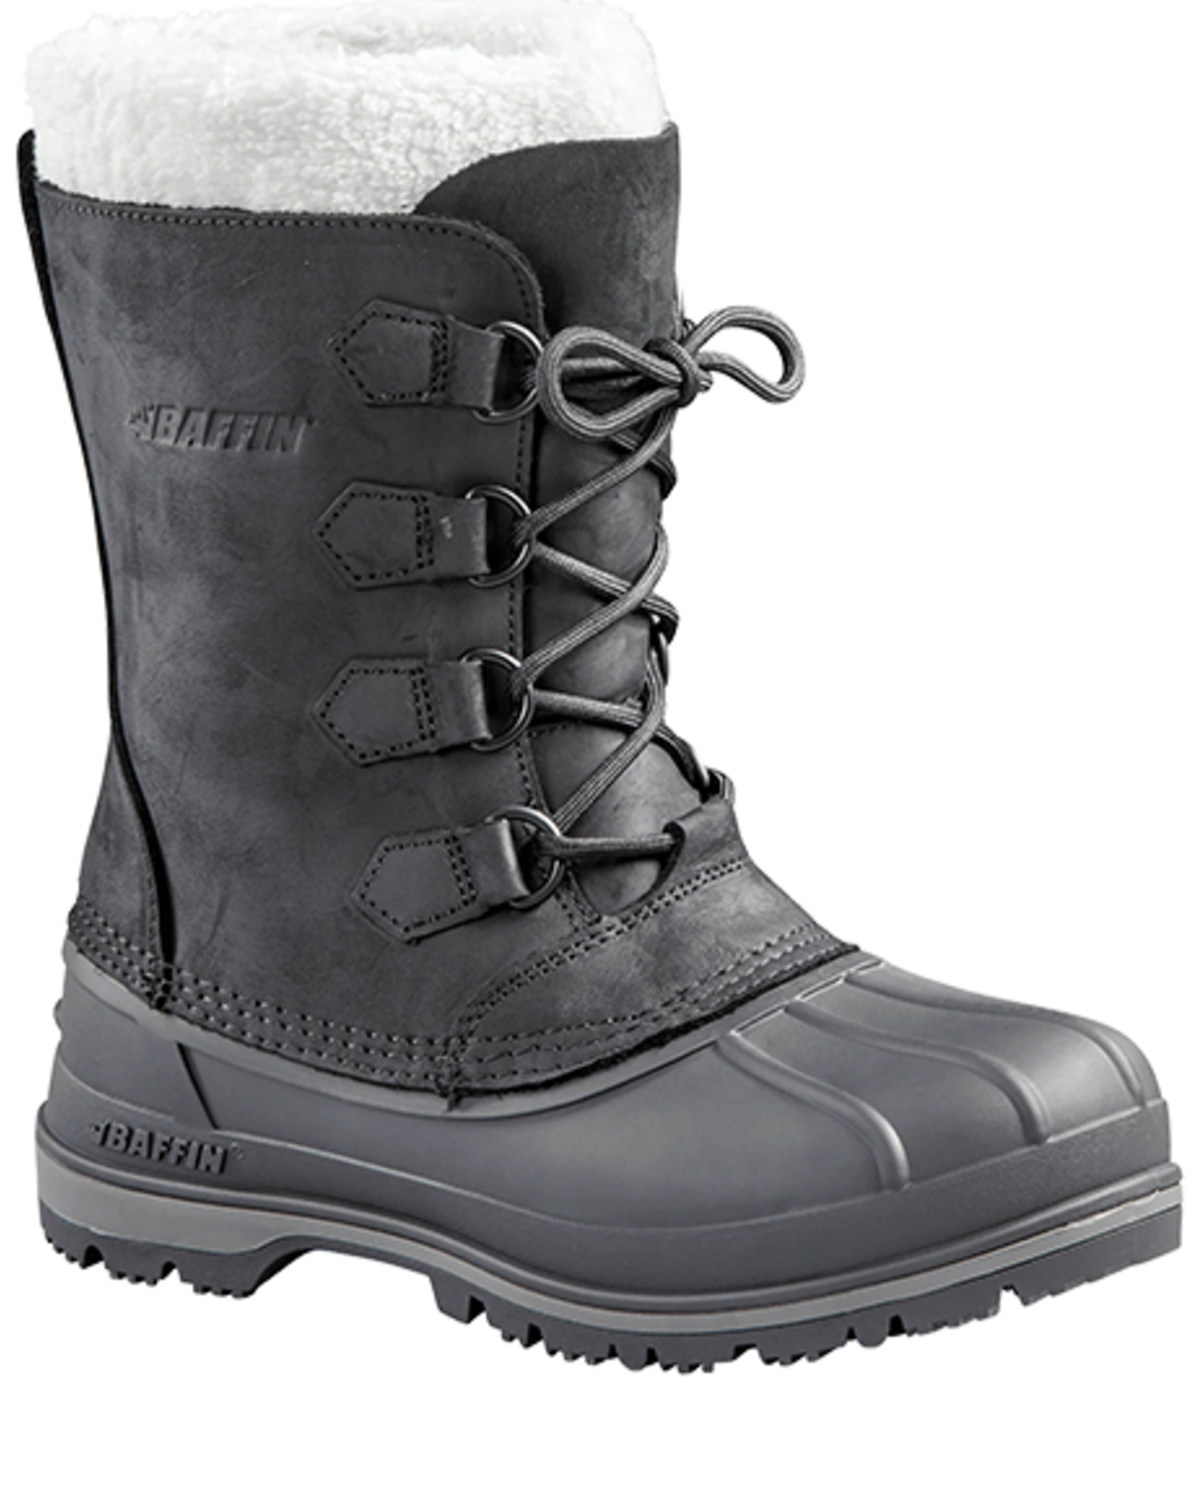 Baffin Women's Canada Insulated Waterproof Boots - Round Toe